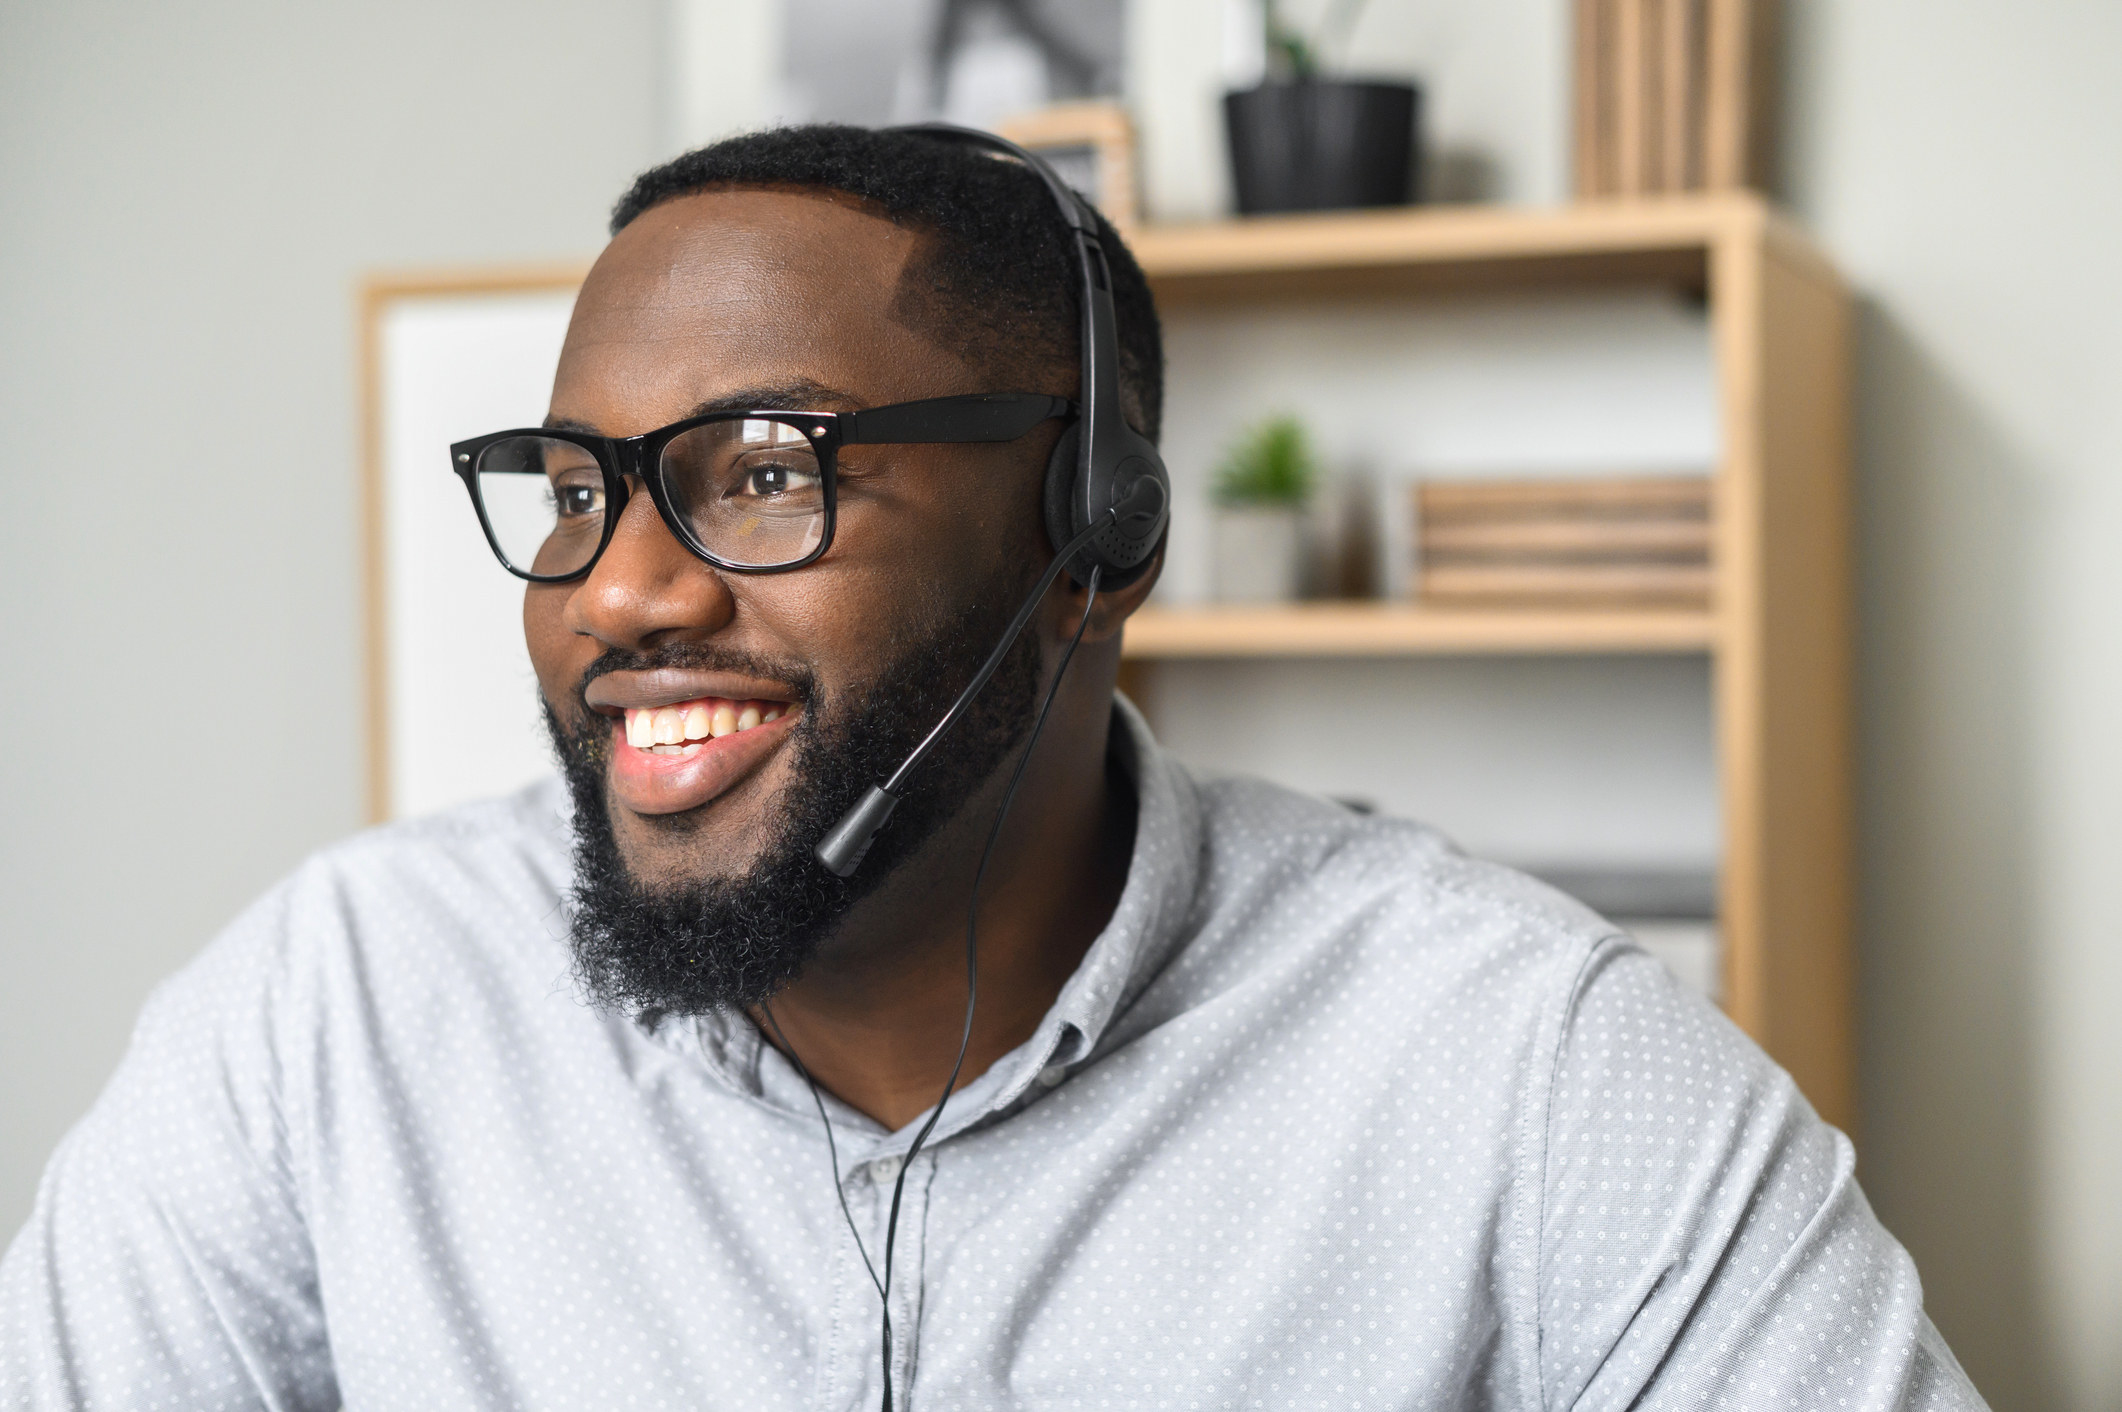 a man smiling and wearing a headset